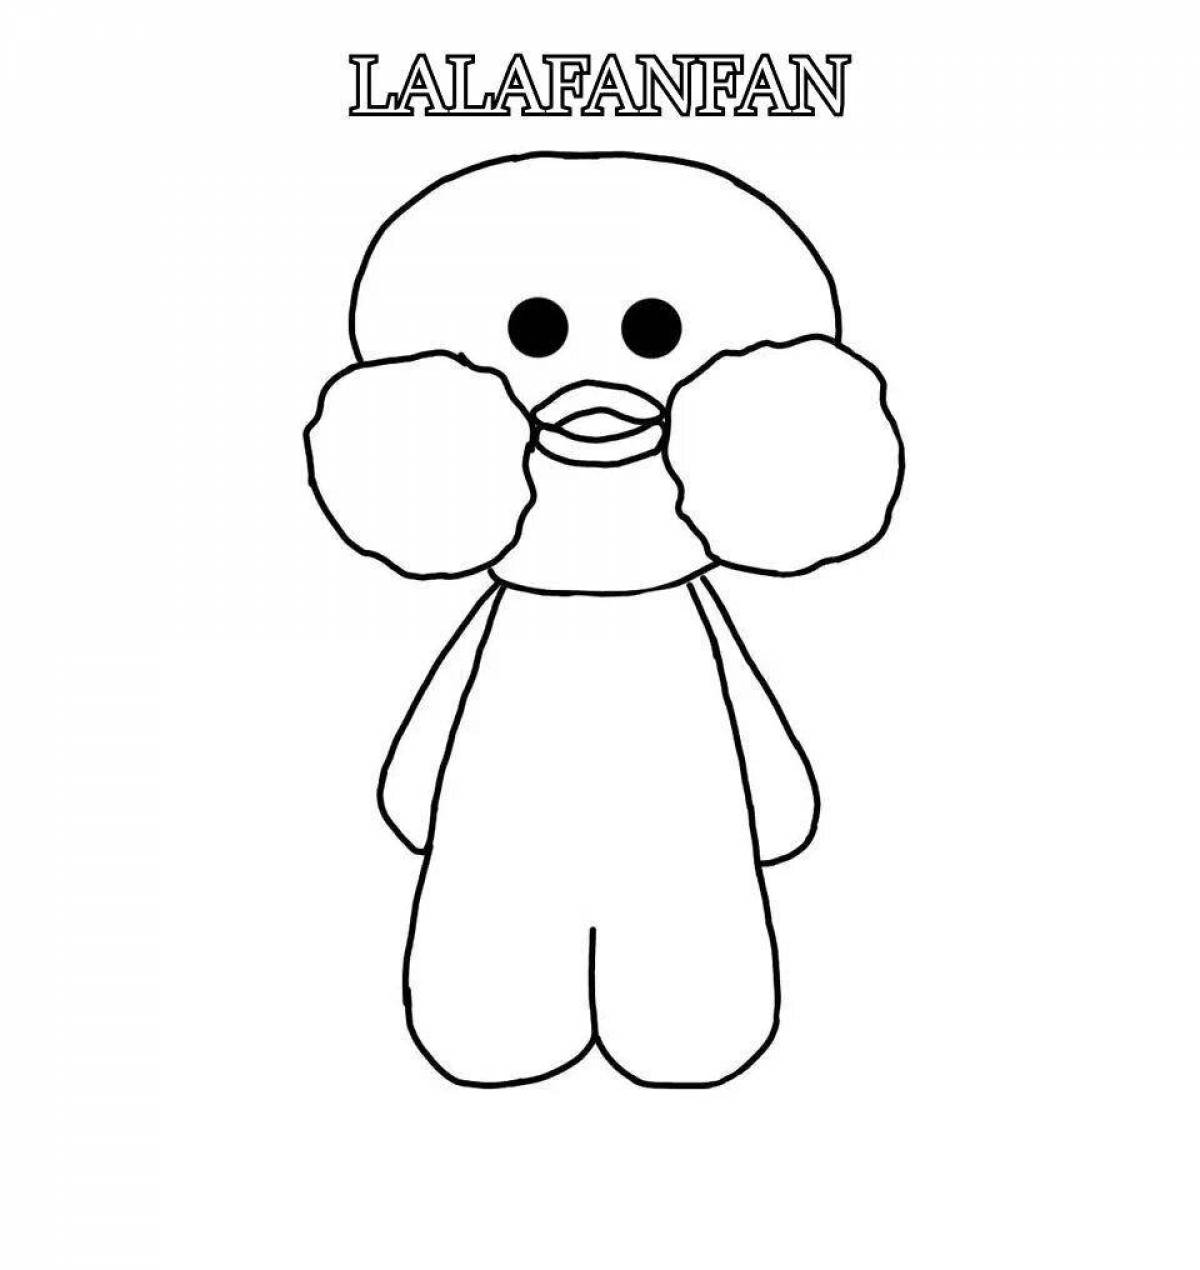 Awesome lalafanfan duck coloring page for kids